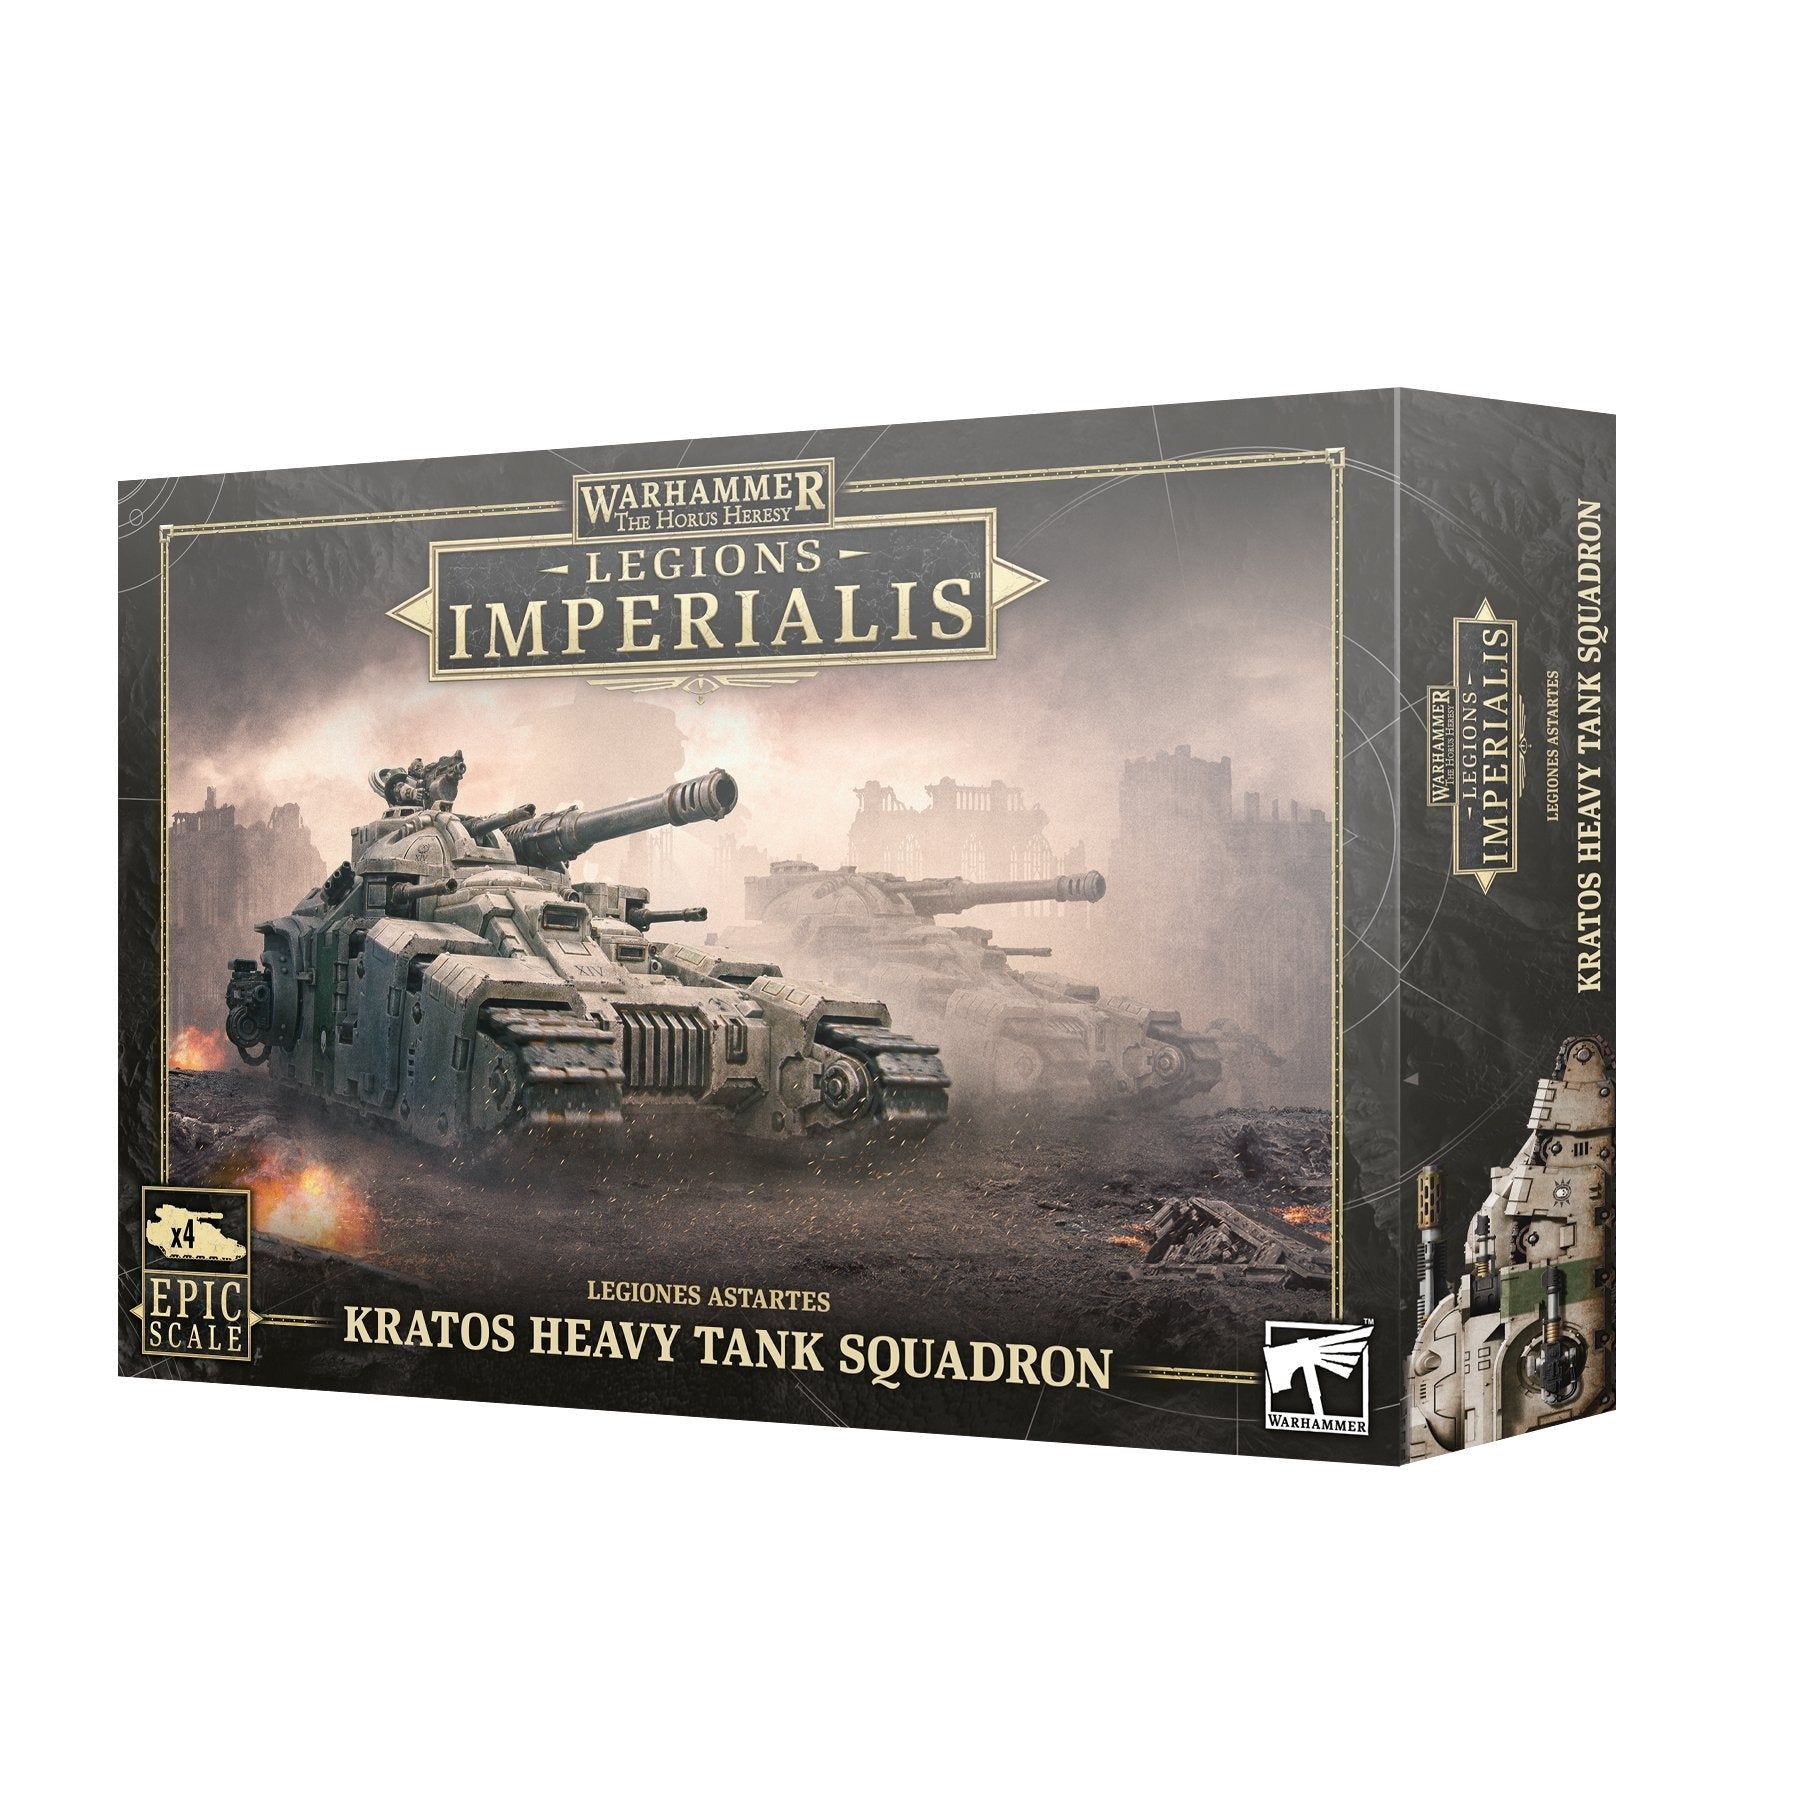 Legions Imperialis: Kratos Heavy Tank Squadron - Release Date 2/12/23 - Loaded Dice Barry Vale of Glamorgan CF64 3HD